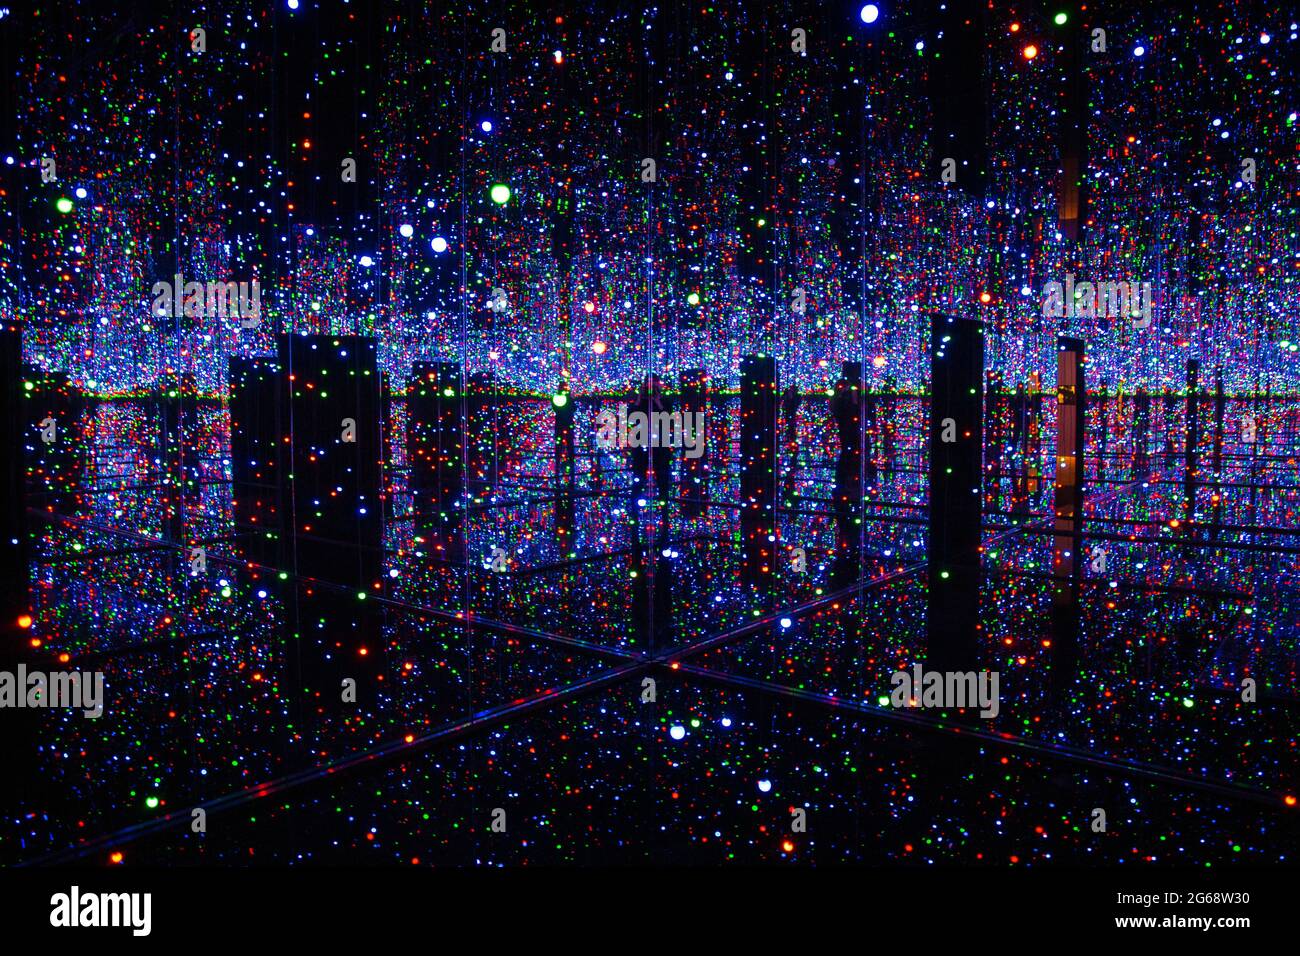 "Infinity Mirrored Room - Filled with the Brilliance of Life" alla mostra Yayoi Kusama Infinity Mirror Rooms 2021 al Tate Modern, Londra, Regno Unito Foto Stock